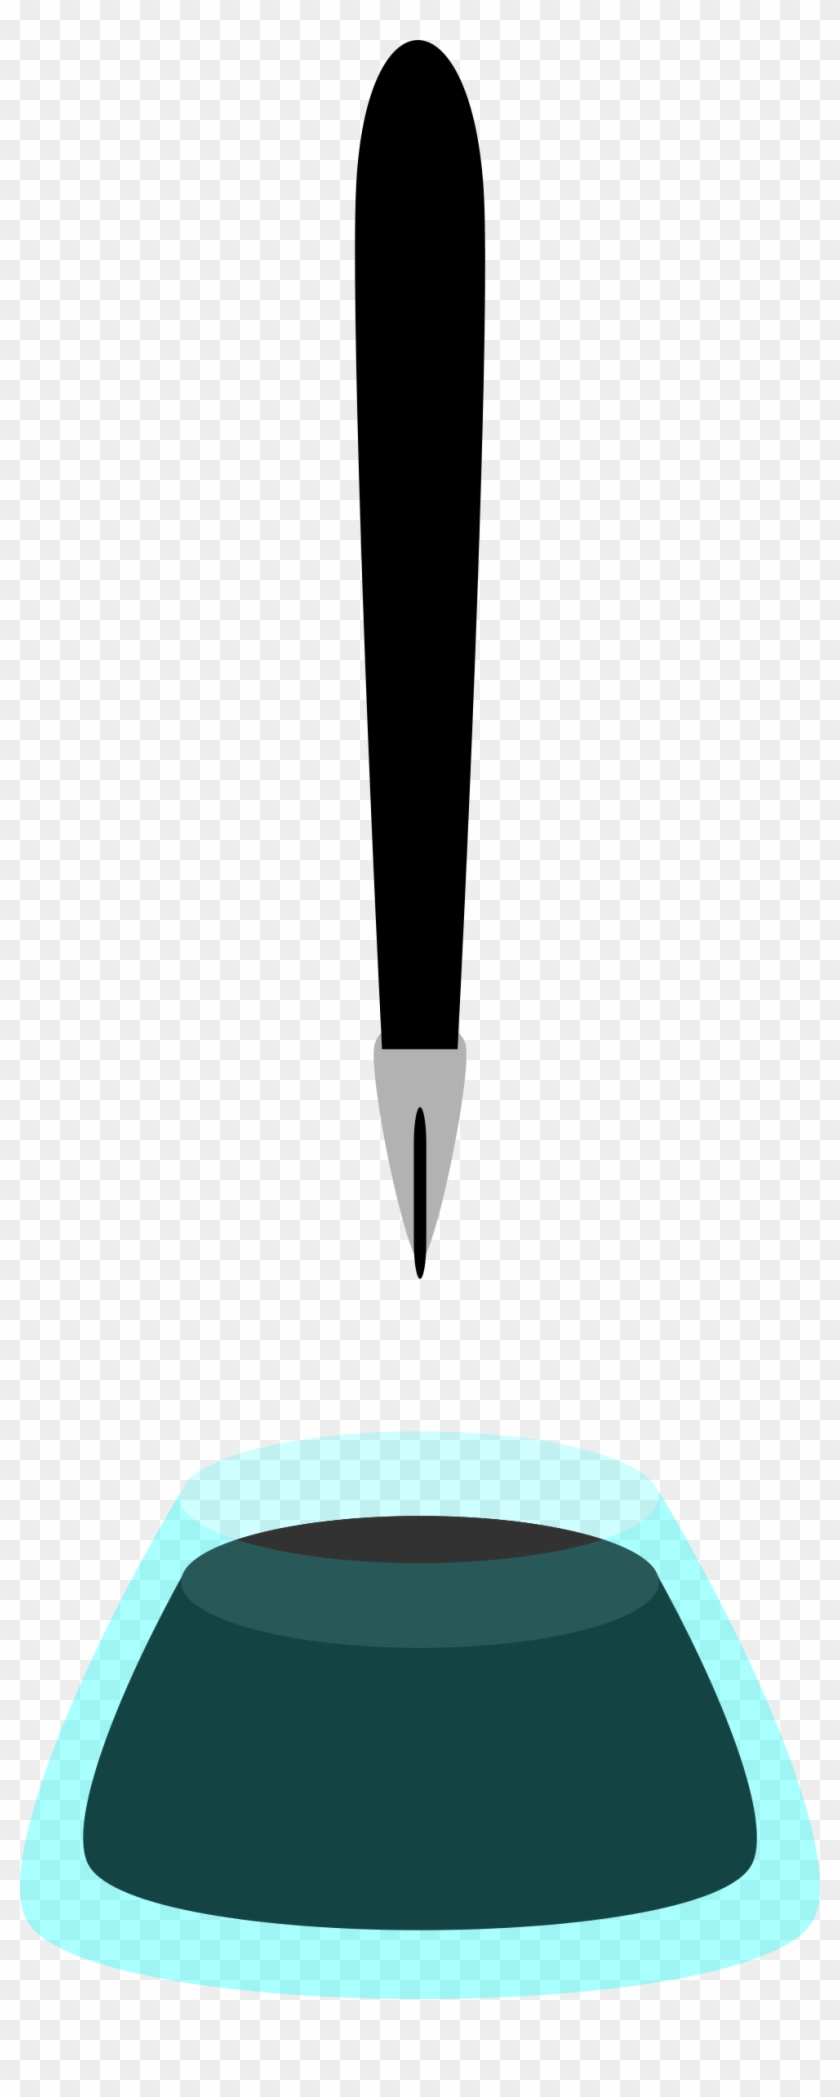 This Free Icons Png Design Of Pen And Ink - Qalam Dawat Clip Art Transparent Png #2001866